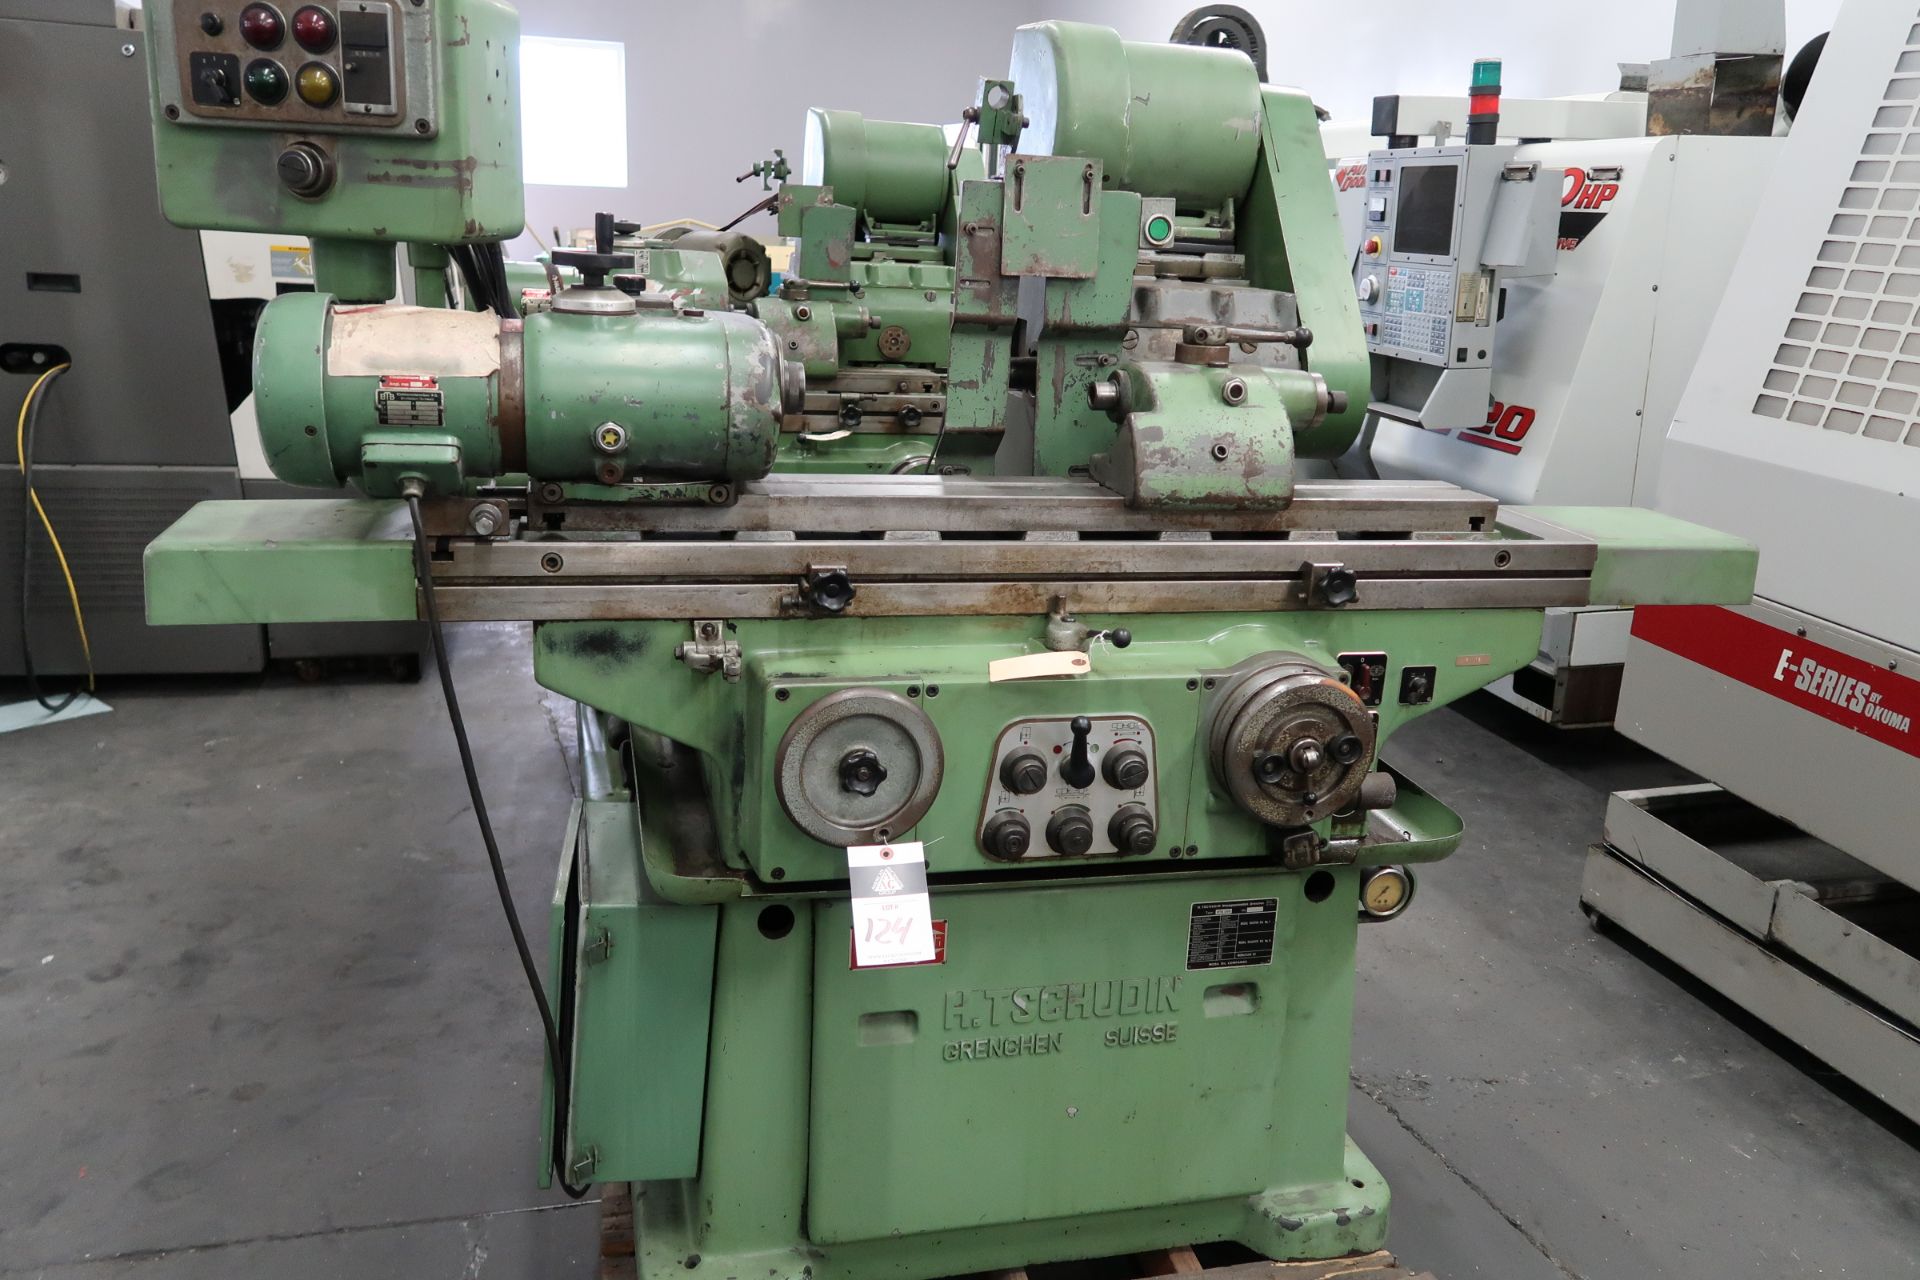 Tschudin HTG400 8” x 24” Cyl Grinder s/n 691302 w/ Motorized 5C Work Head, Tailstock, SOLD AS IS - Image 2 of 9